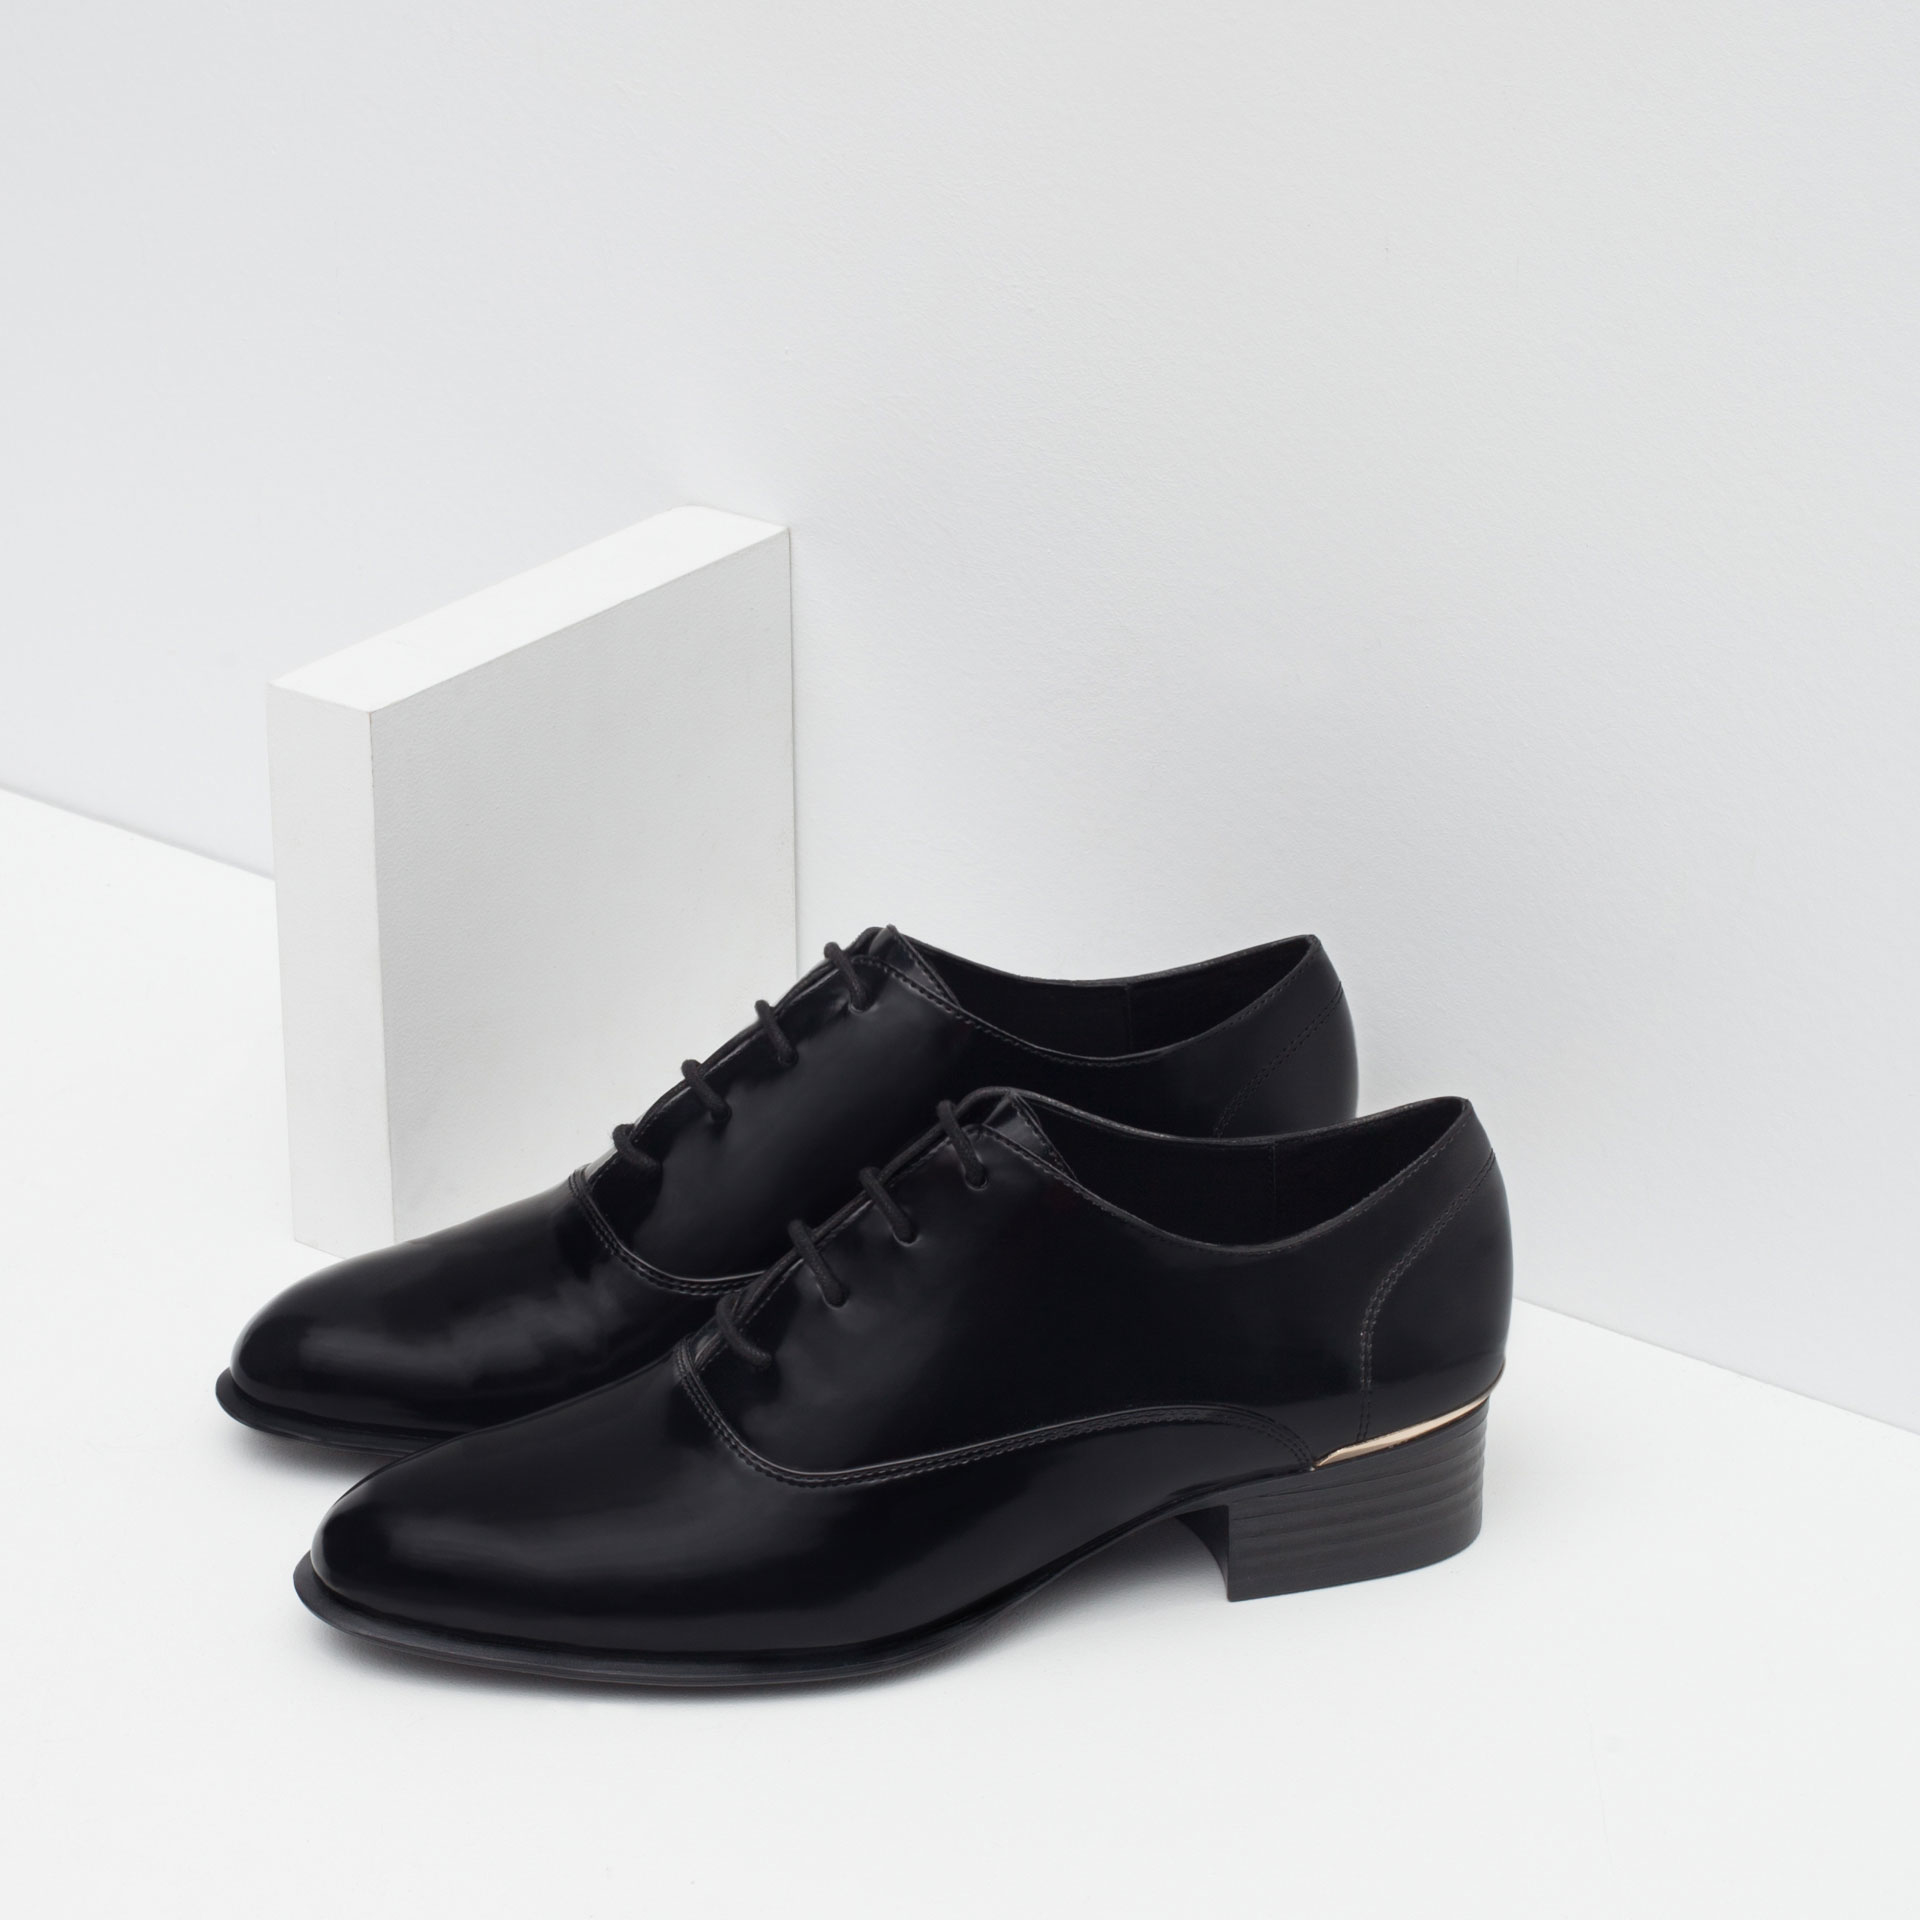 Zara Flat Lace-up Shoes Flat Lace-up Shoes in Black